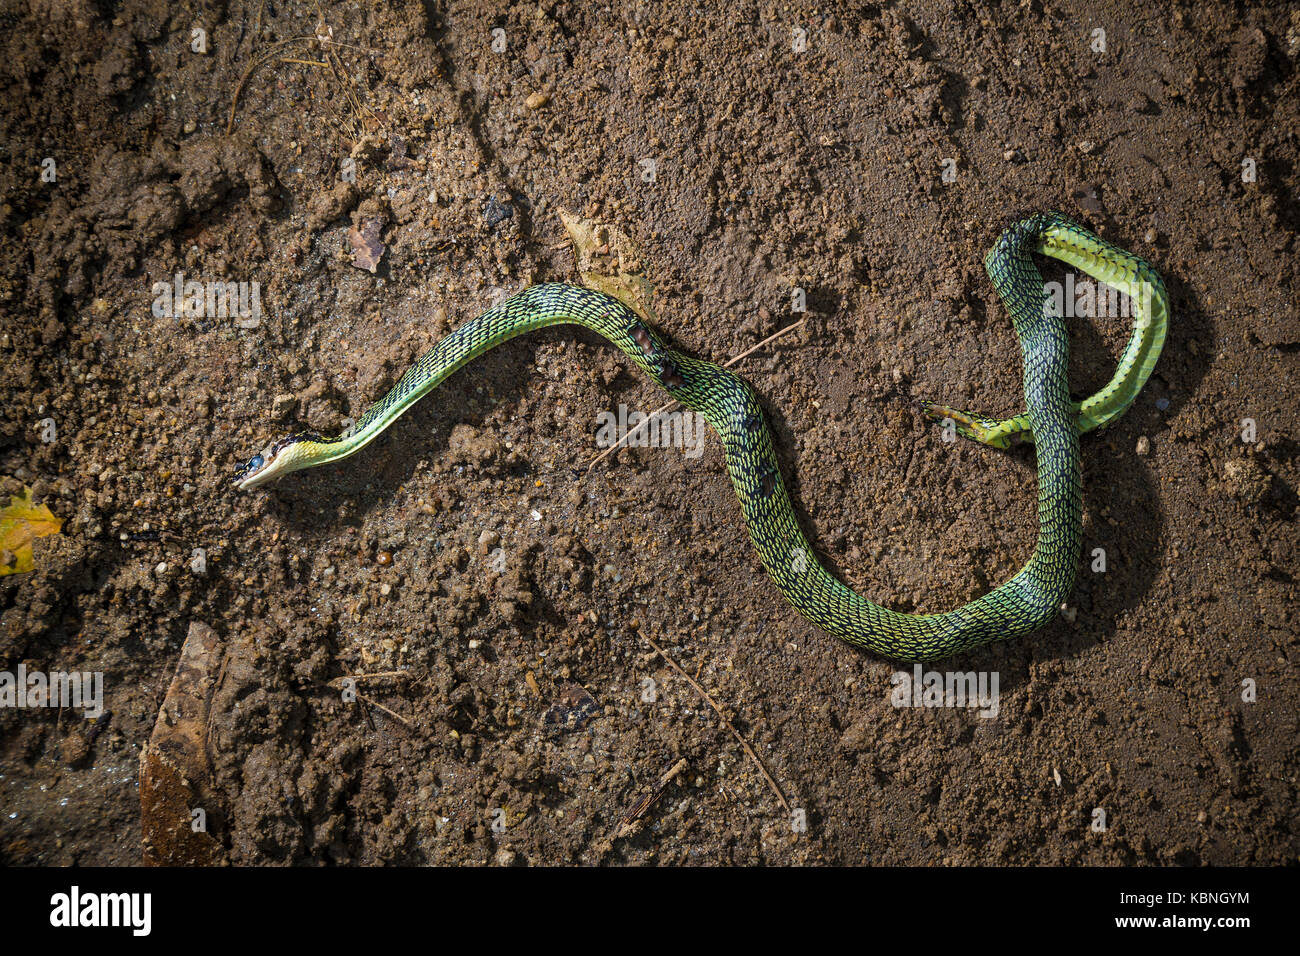 Road kill, a dead green snake was run over by a car on a dirt road Stock Photo